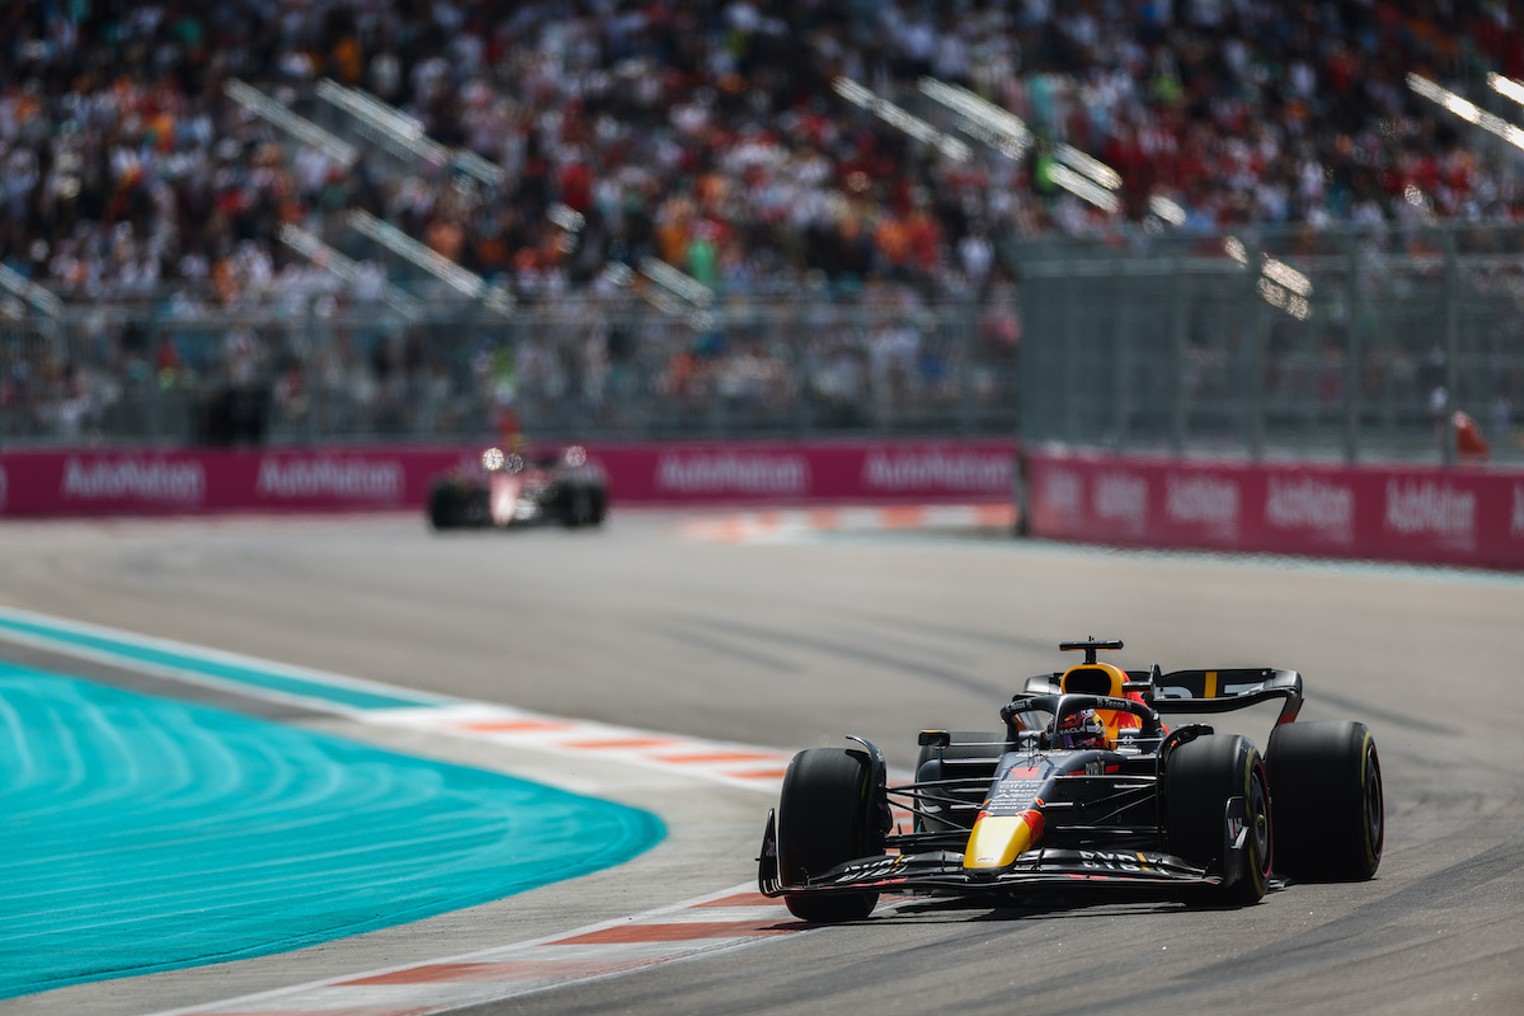 How to Watch the F1 Race in Las Vegas and Dine With Celebrities - Eater  Vegas